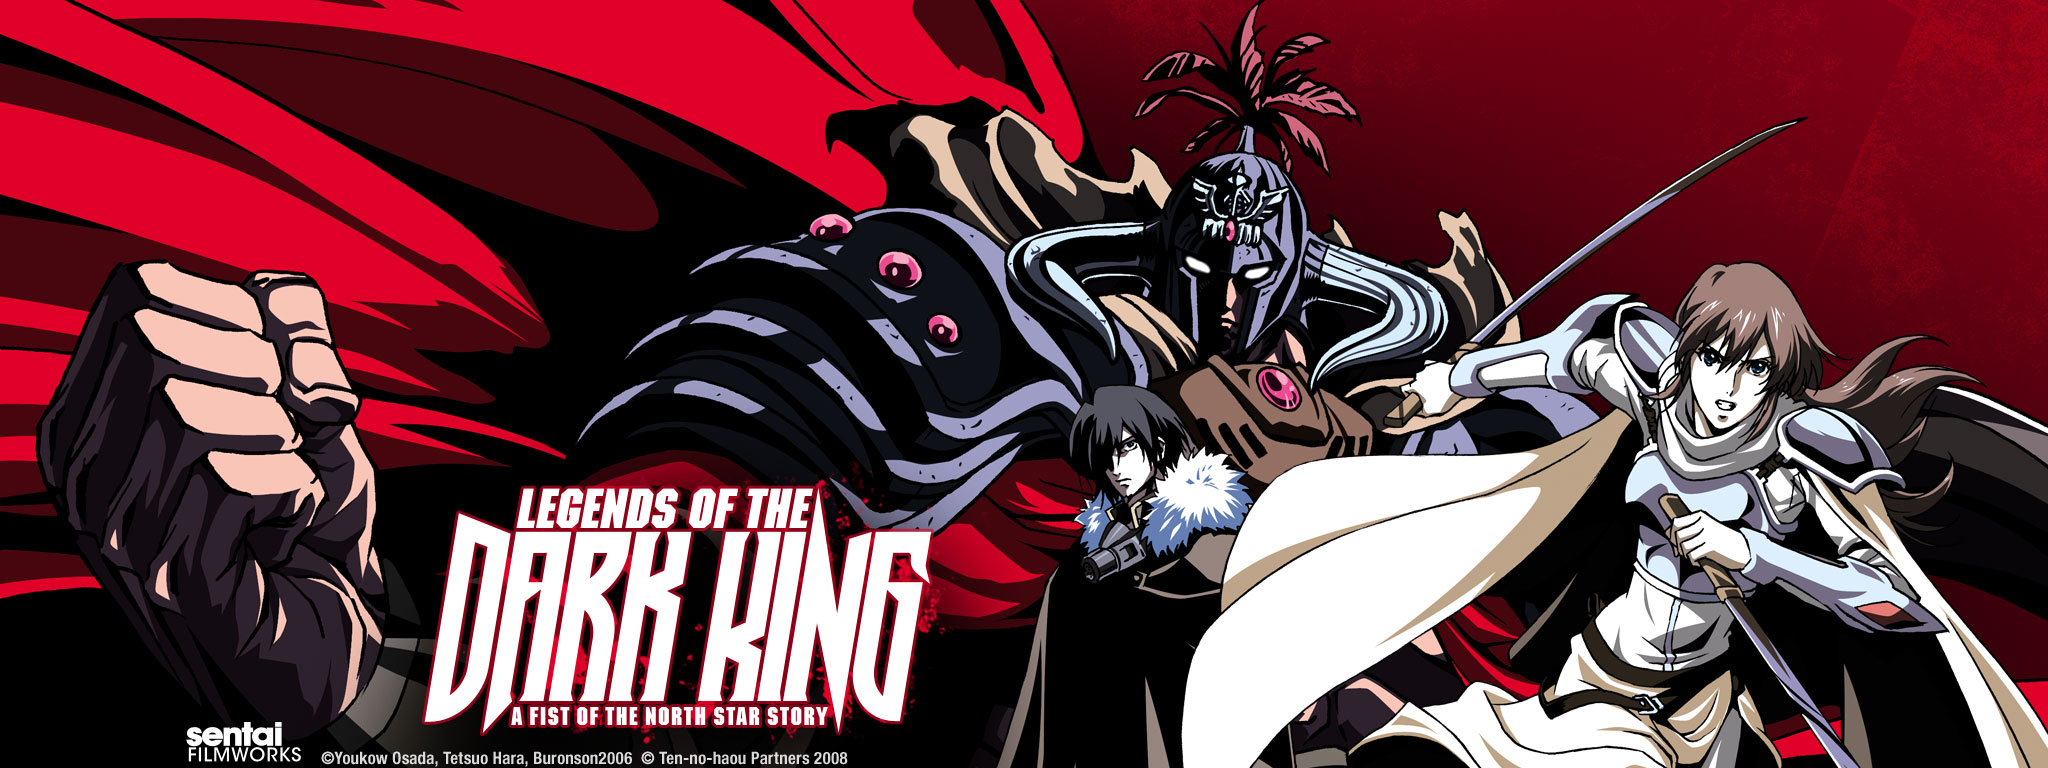 Legends of the Dark King ~ A Fist of the North Star Story - Sentai Filmworks